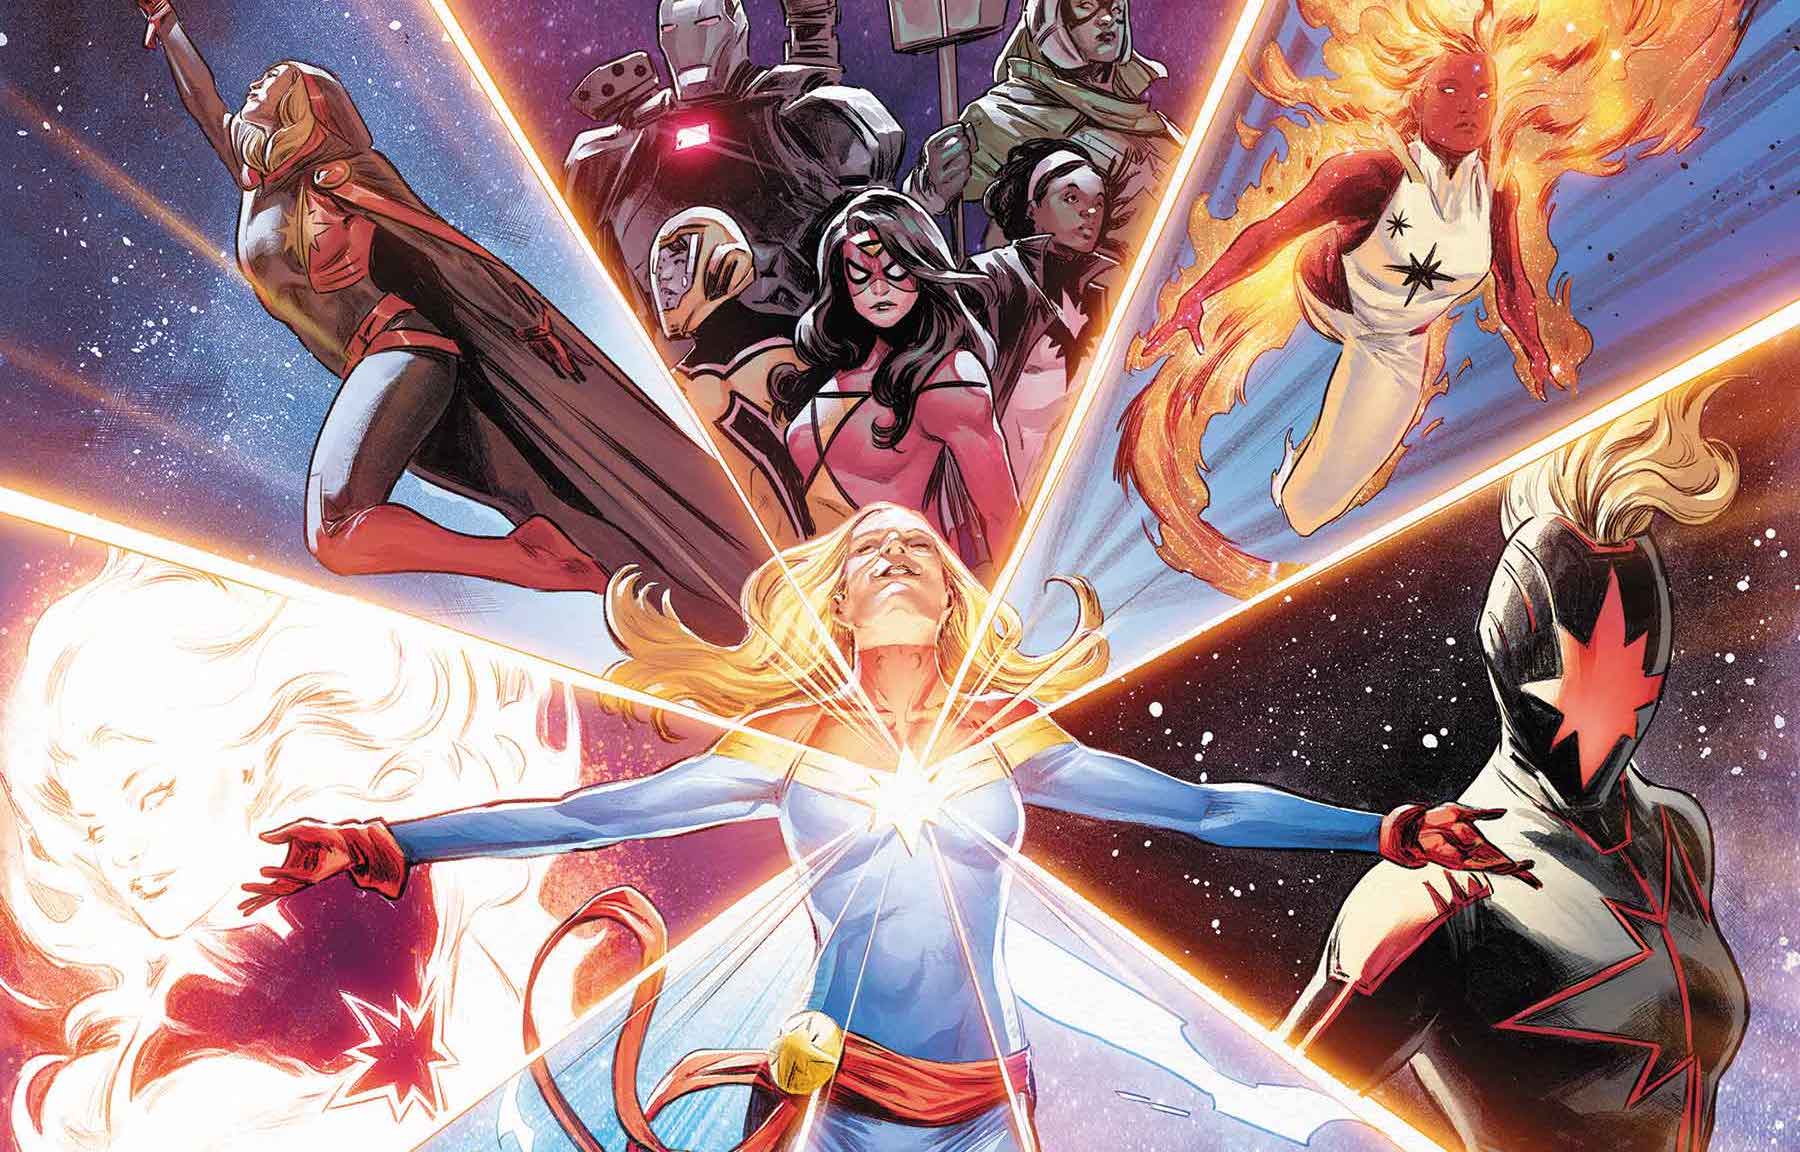 Kelly Thompson's 'Captain Marvel' run ends with extra-sized issue #50